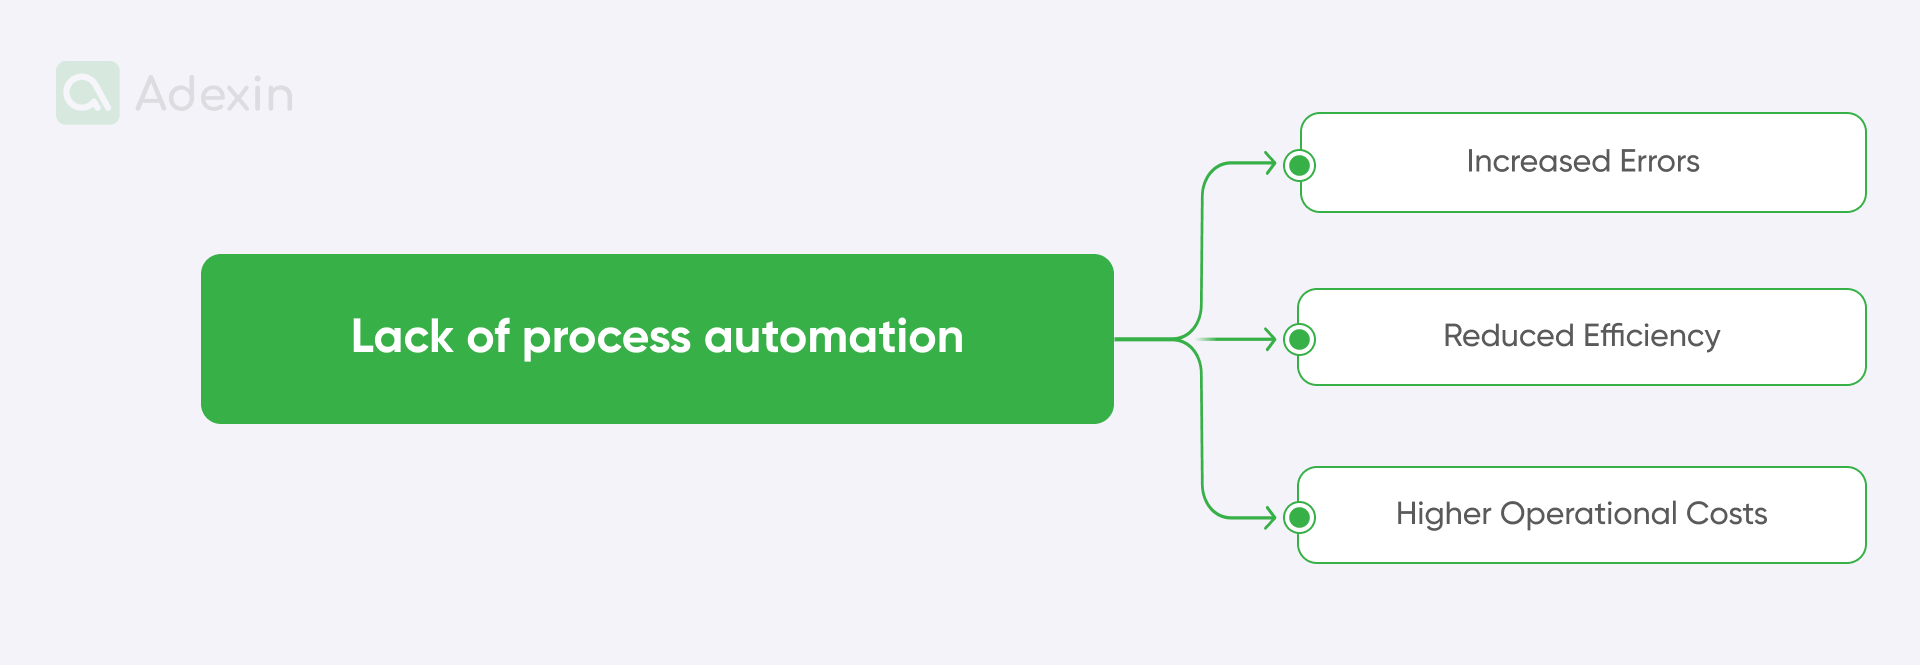 Elements of lack of process automation